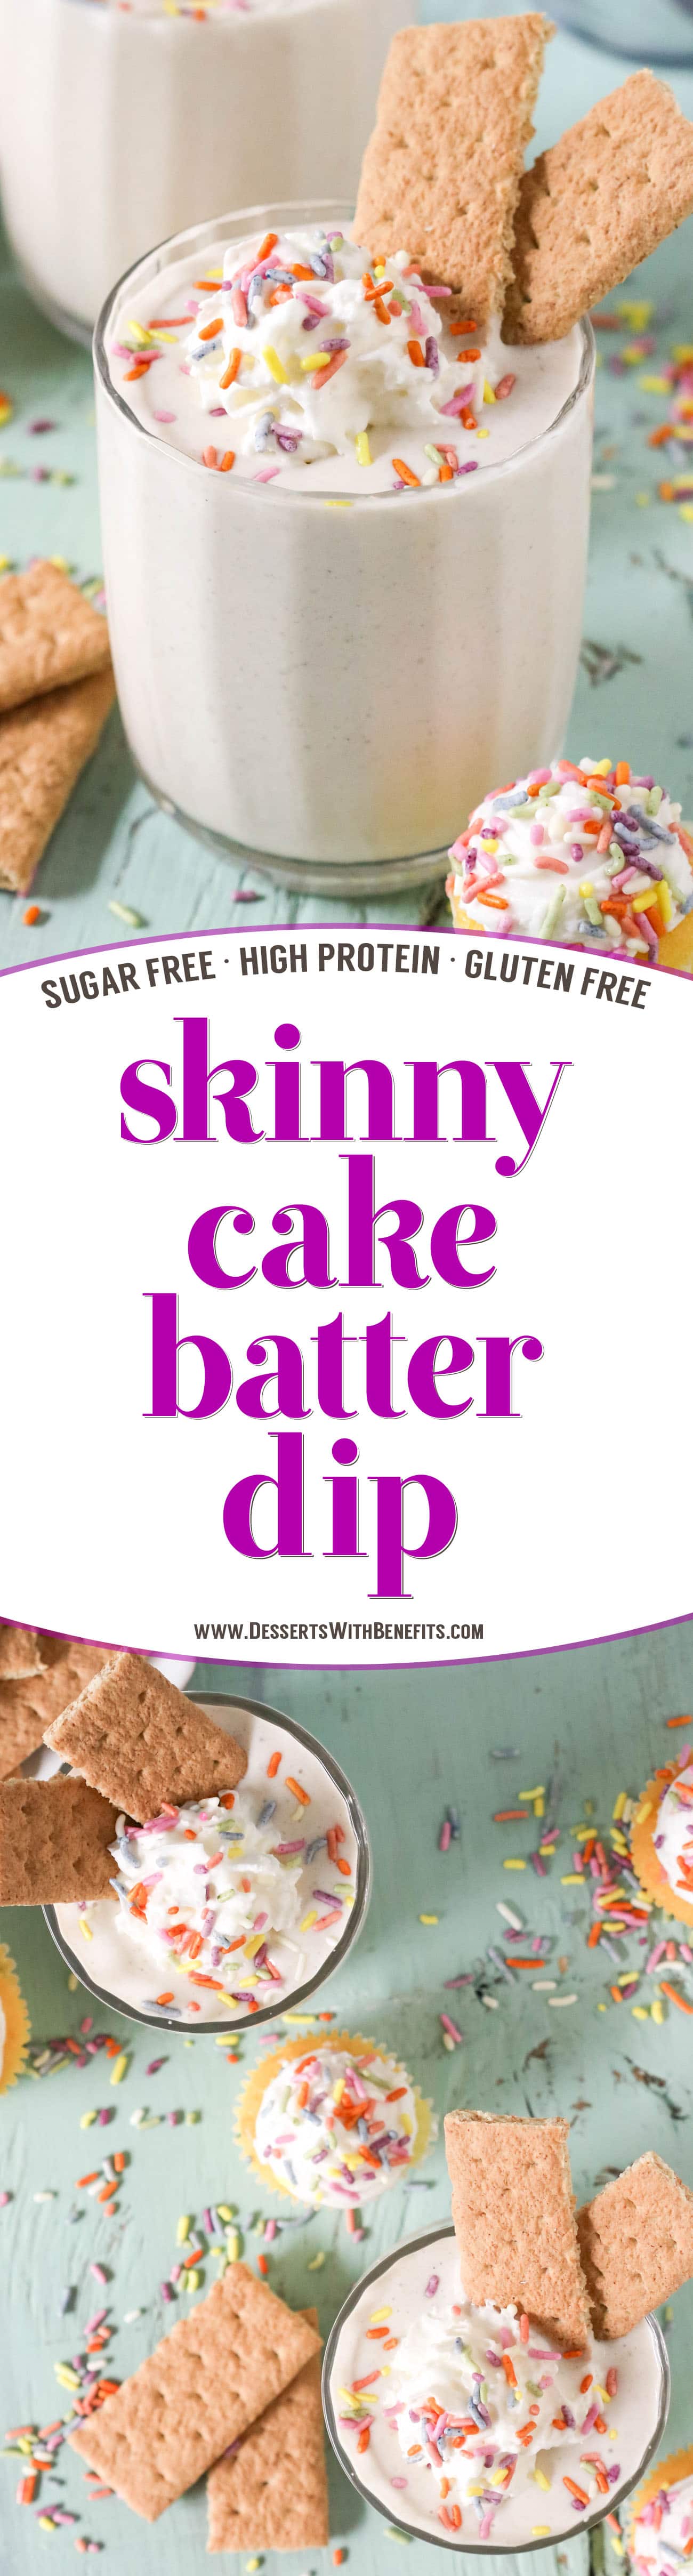 This Cake Batter Dip looks and tastes like you tossed a slice of Vanilla Cake into a blender, frosting and all!  It's ultra buttery and sweet, rich and flavorful, and smooth and creamy.  One bite and you'd never guess it's healthy, sugar free, low fat, high protein, and gluten free too.  Serve up this deliciousness alongside some Graham Crackers, Animal Crackers, fresh strawberries, or spoons alone.